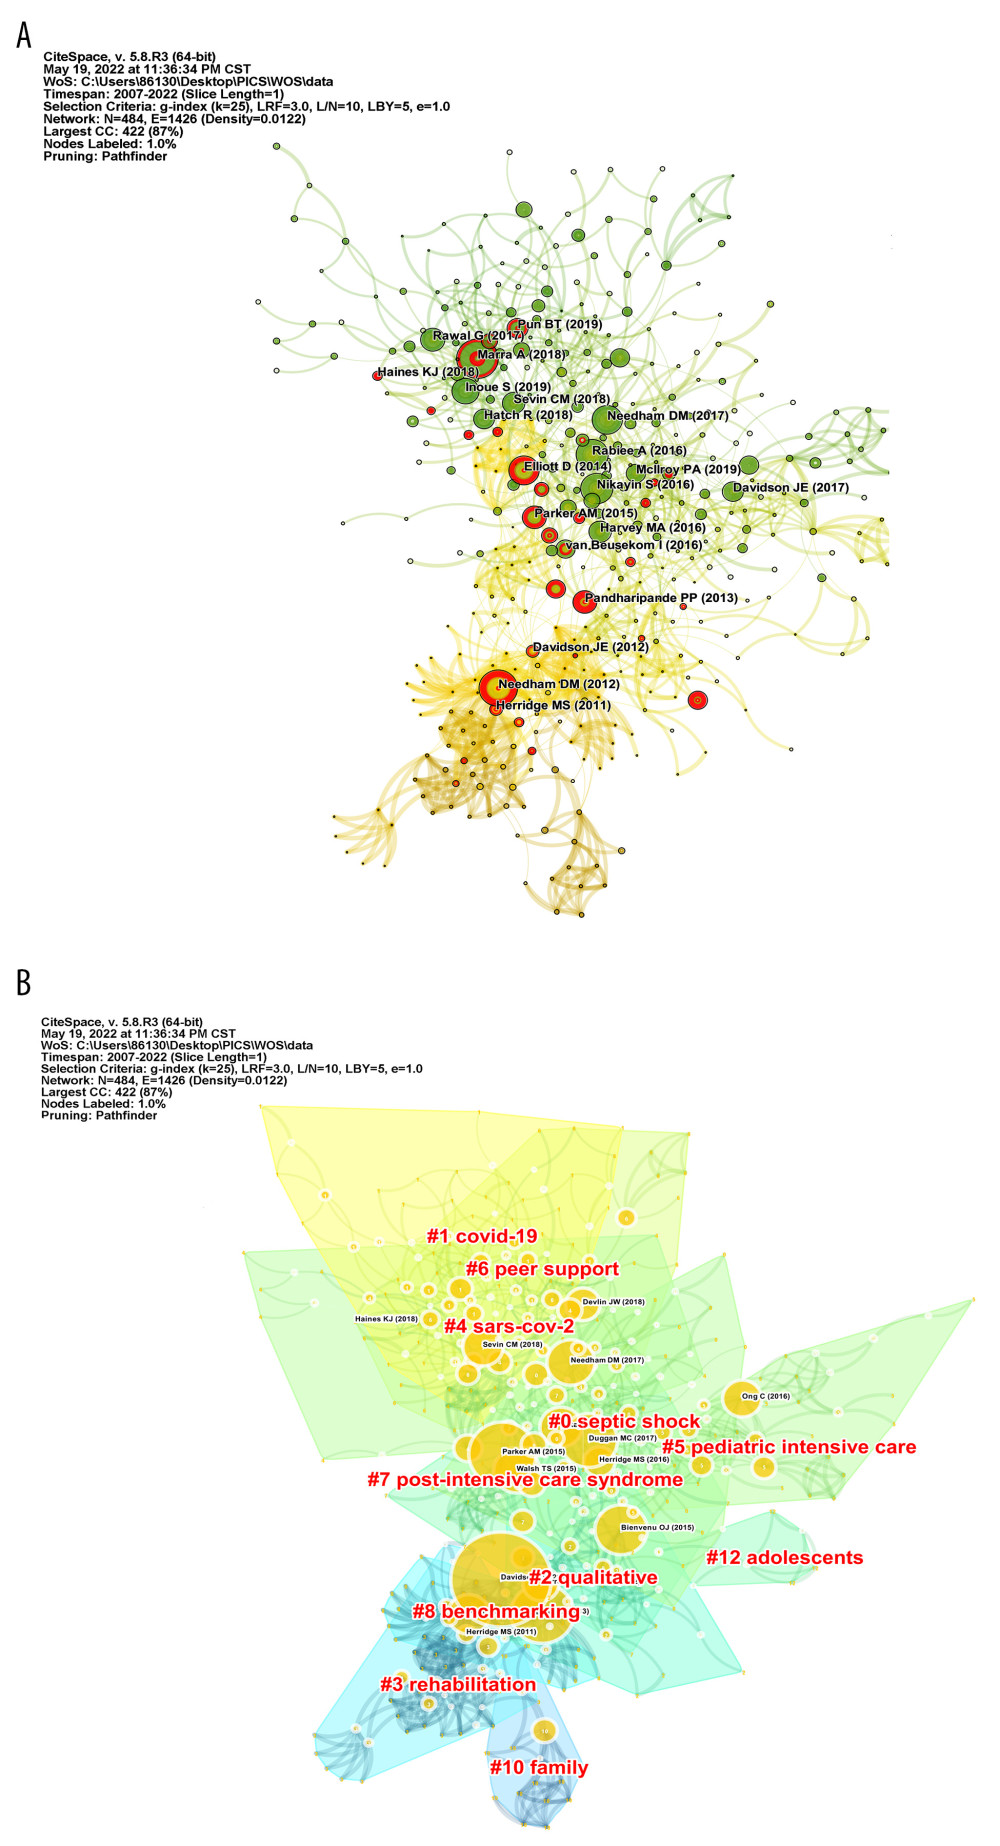 Author Co-citation Network. Figure A represents different researchers, with nodes representing them. The larger the node, the more frequently it is cited. The thickness and color of the inner circles of the nodes indicate the frequency of citations in different time periods. The lines between nodes represent the co-citation relationship, and their thickness indicates the strength of the co-citation. The color of the lines corresponds to the time of the first co-citation of the node, with the color changing from cool blue to warm red indicating the change of time from early to recent. Figure B, clustering analysis results are shown based on the LLS clustering method. Different color blocks represent different clusters. The position of the color blocks of the authors represented by different nodes indicates the corresponding research fields, with the color changing from cool blue to warm red indicating the change of time from early to recent.